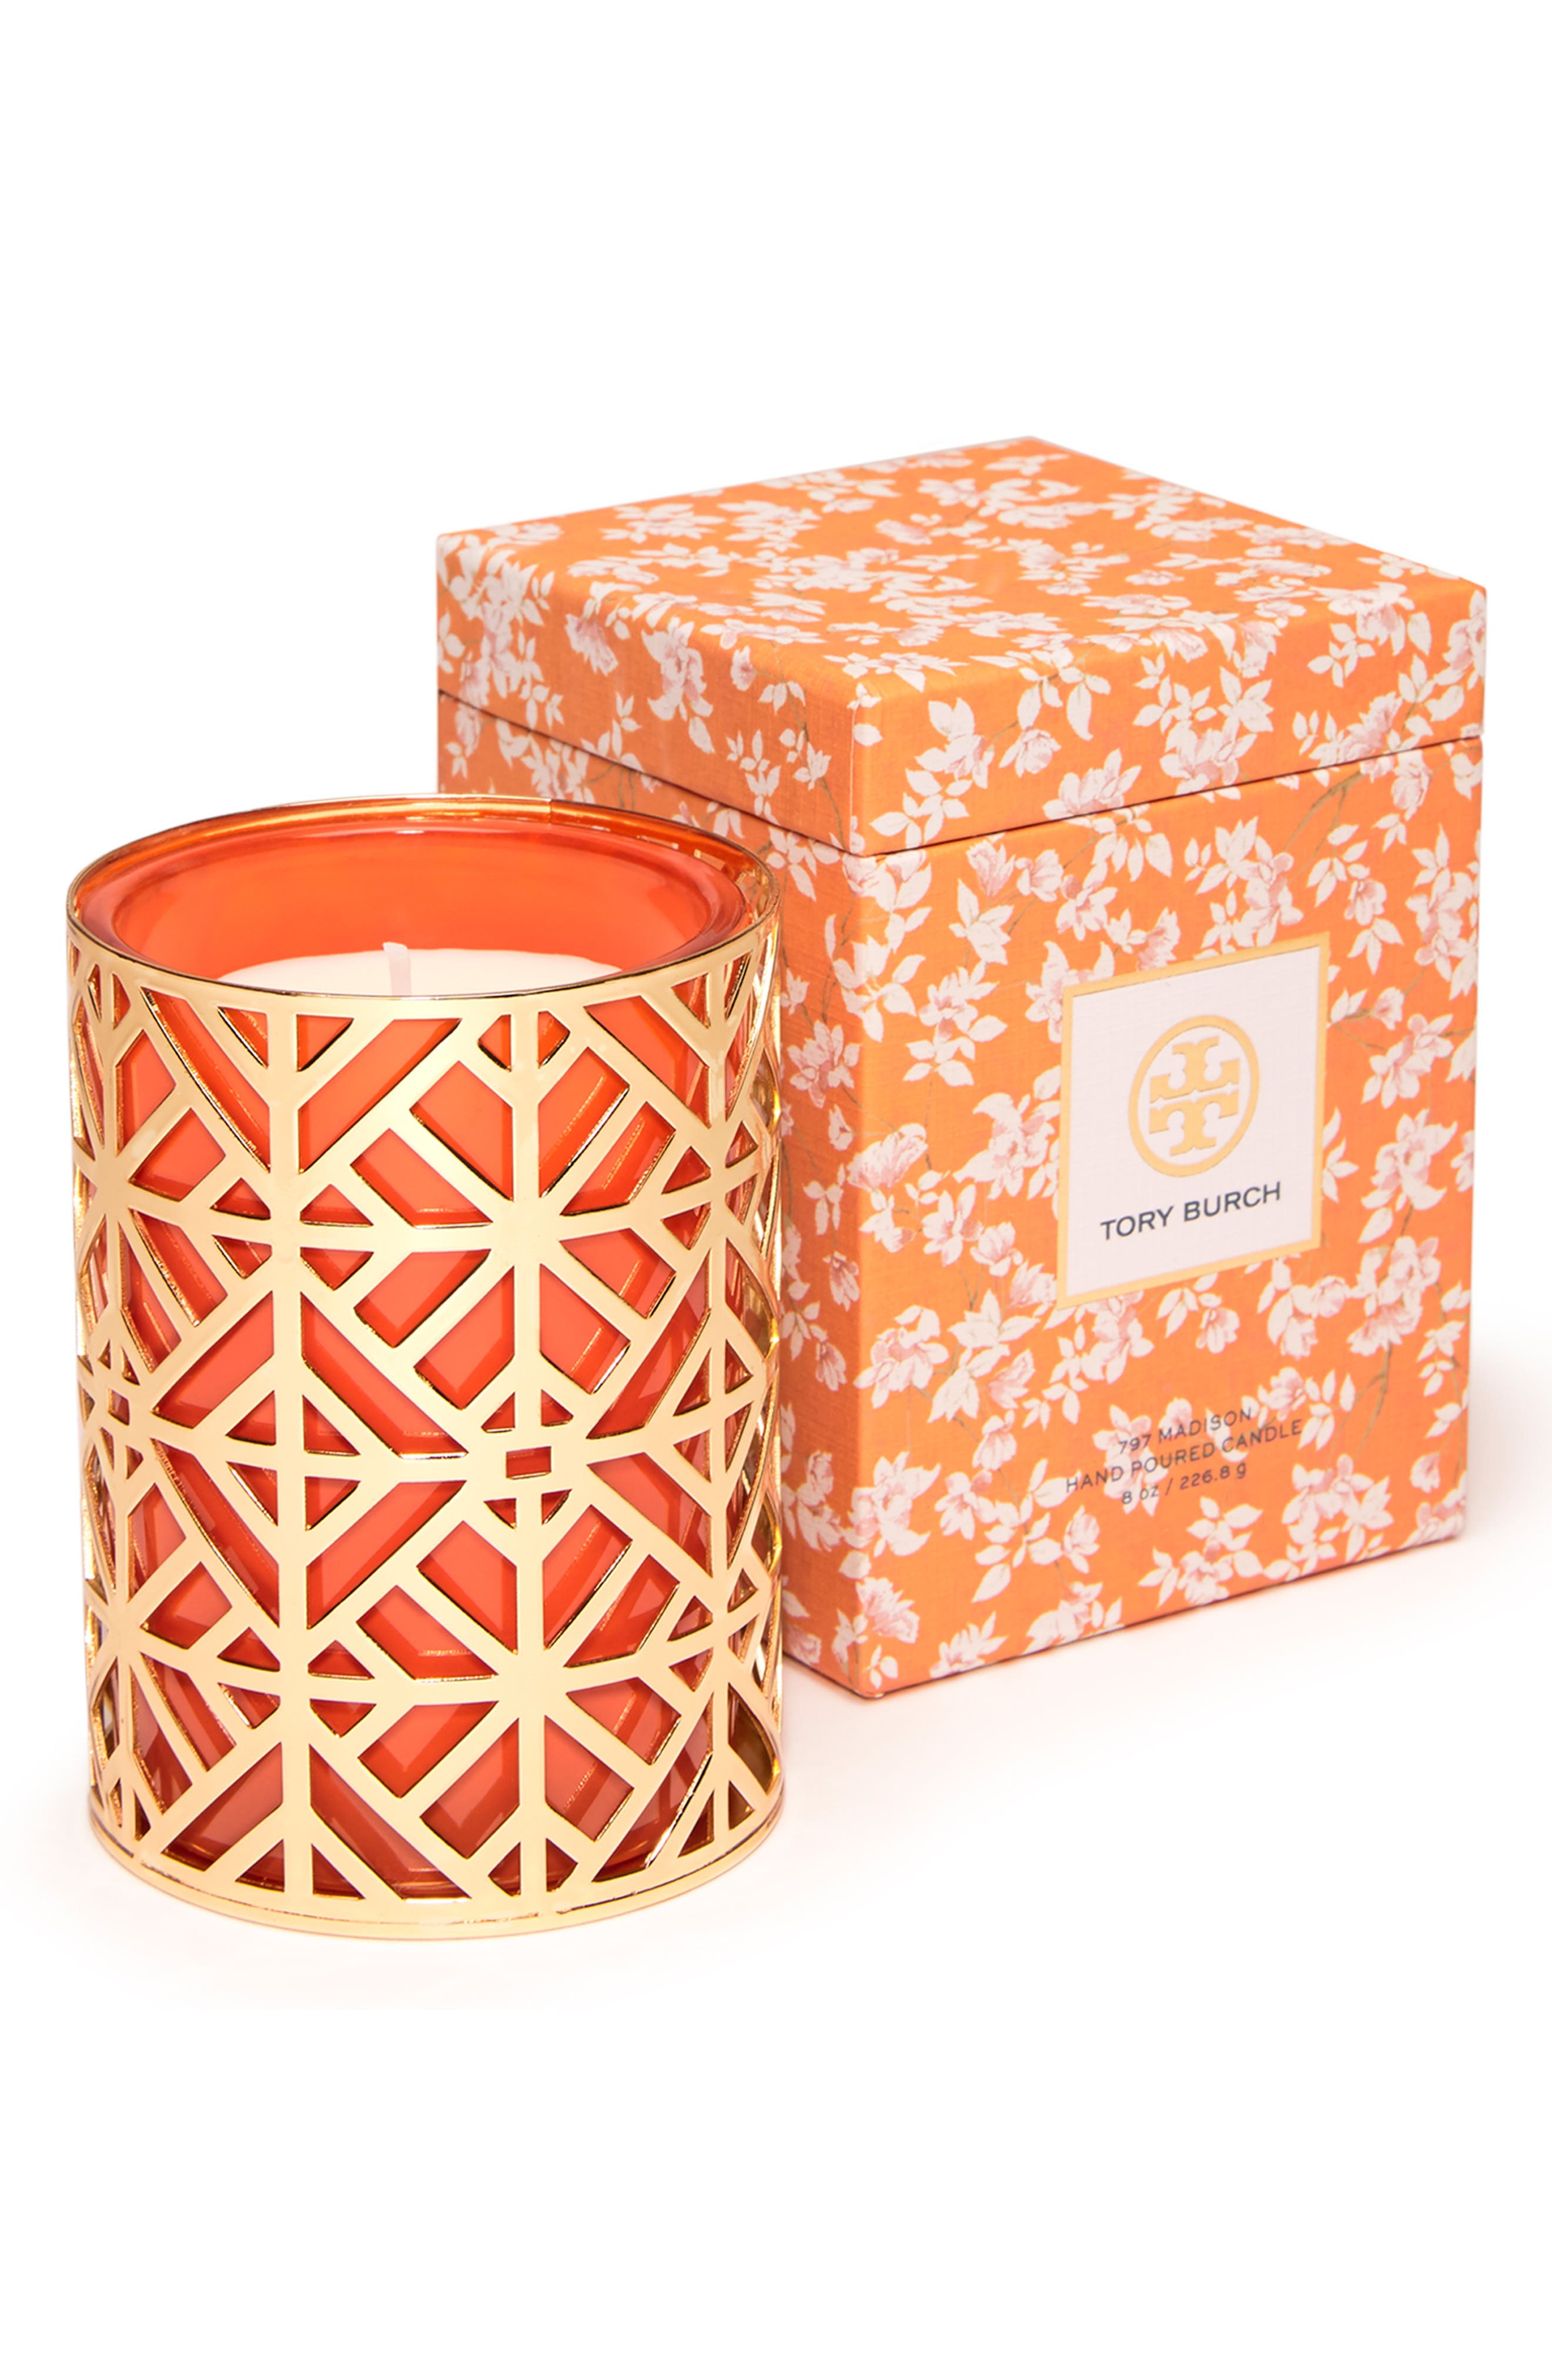 Tory Burch Pillar Candle in Orange at Nordstrom